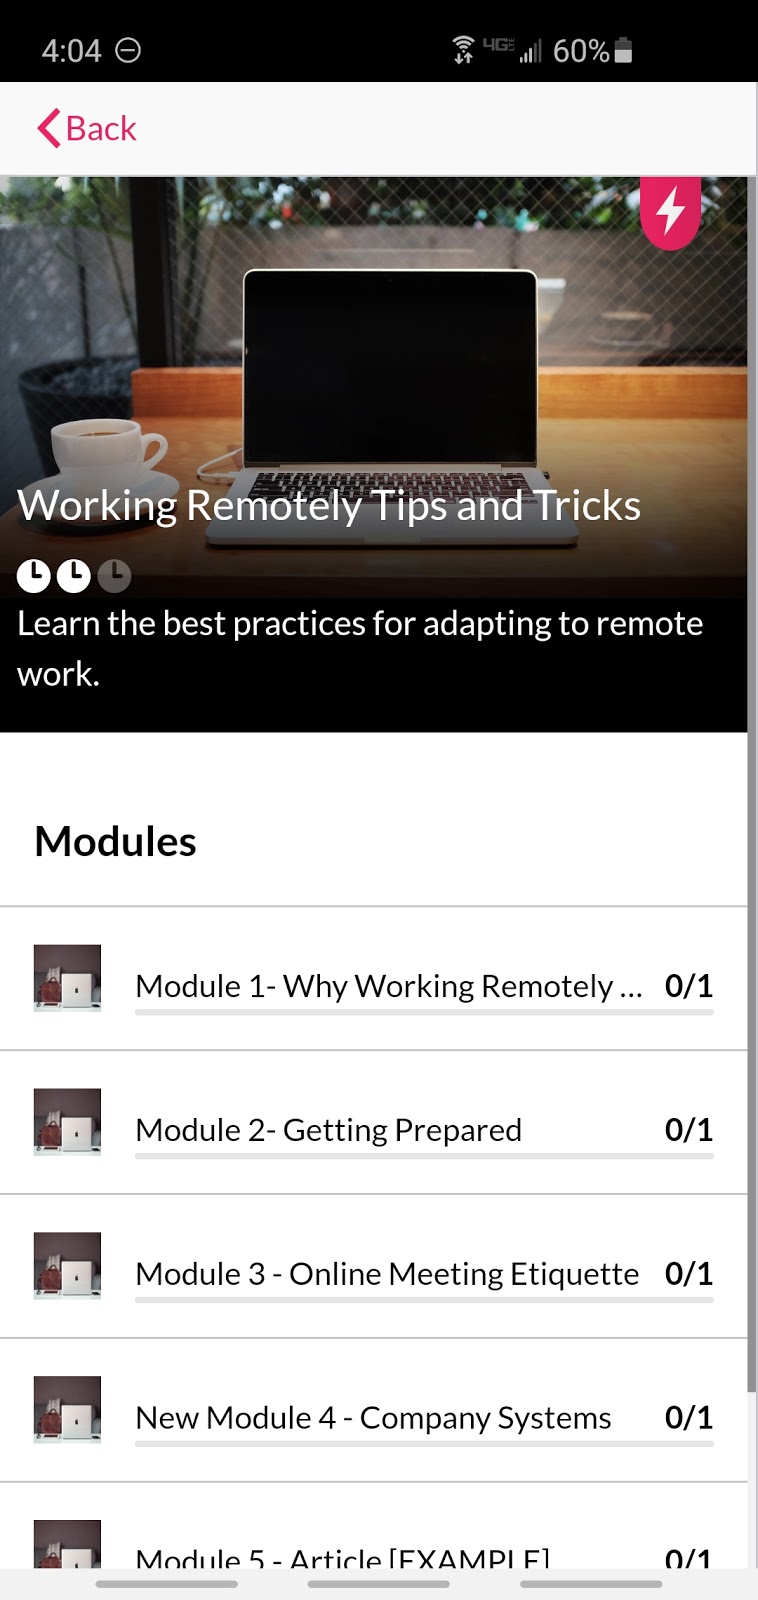 Working remotely tips and tricks: Learn the best practices for adapting to remote work.